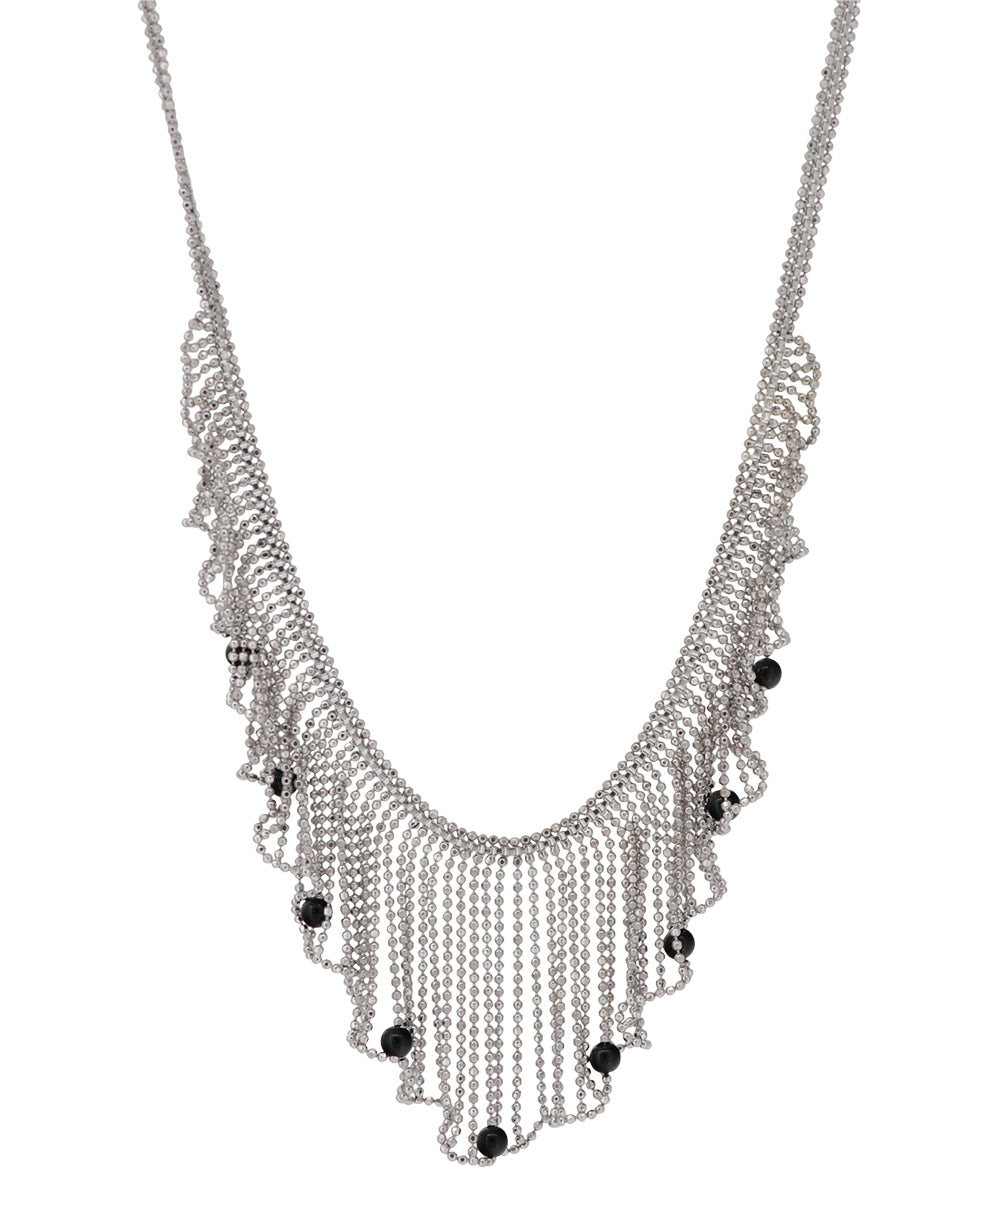 Rhodium Plated Fine Silver Fringe Necklace With Black Spinel Beads